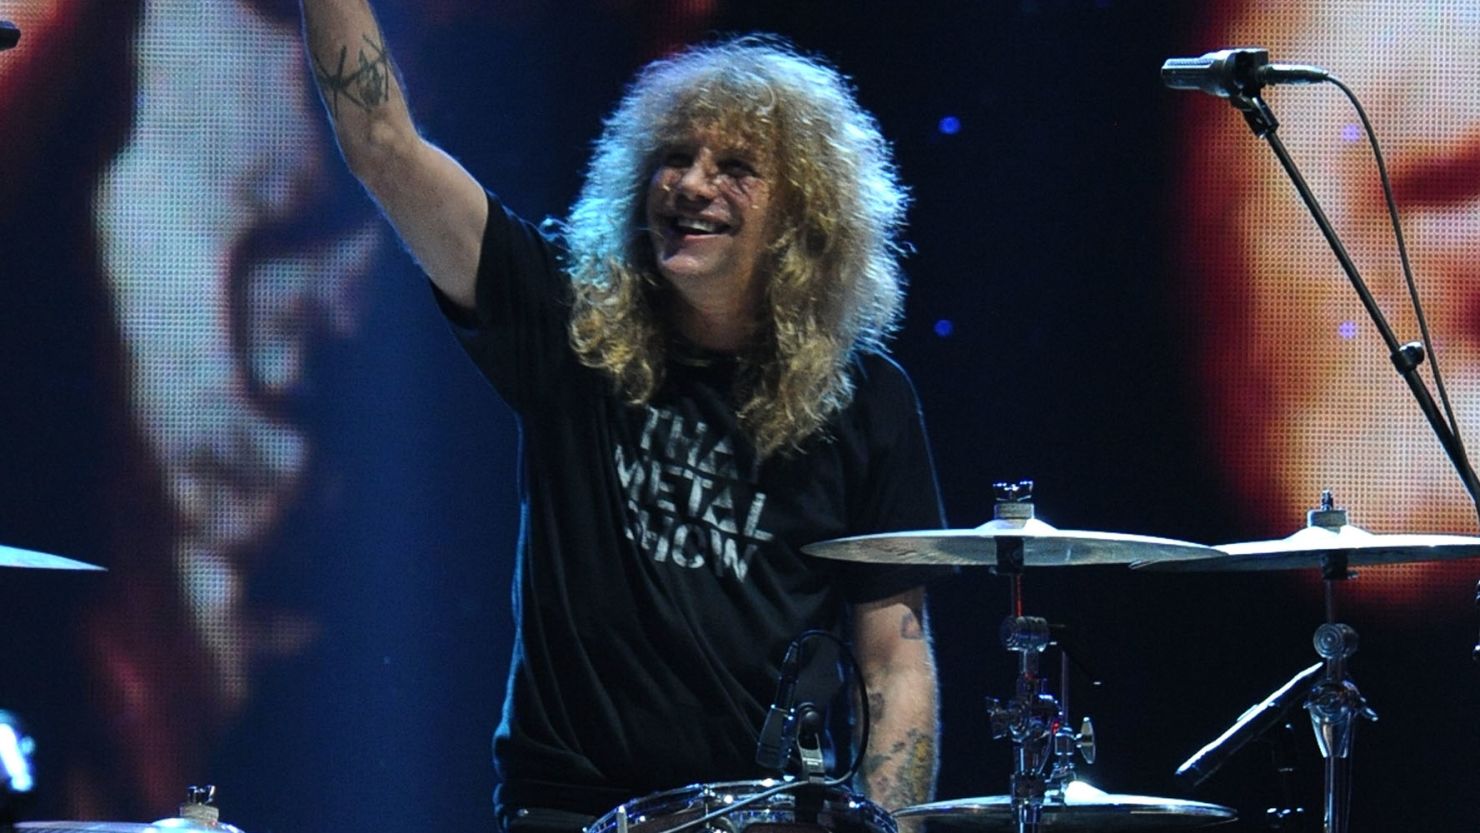 Steven Adler, shown here performing during the 27th Annual Rock And Roll Hall Of Fame Induction Ceremony on April 14, 2012.